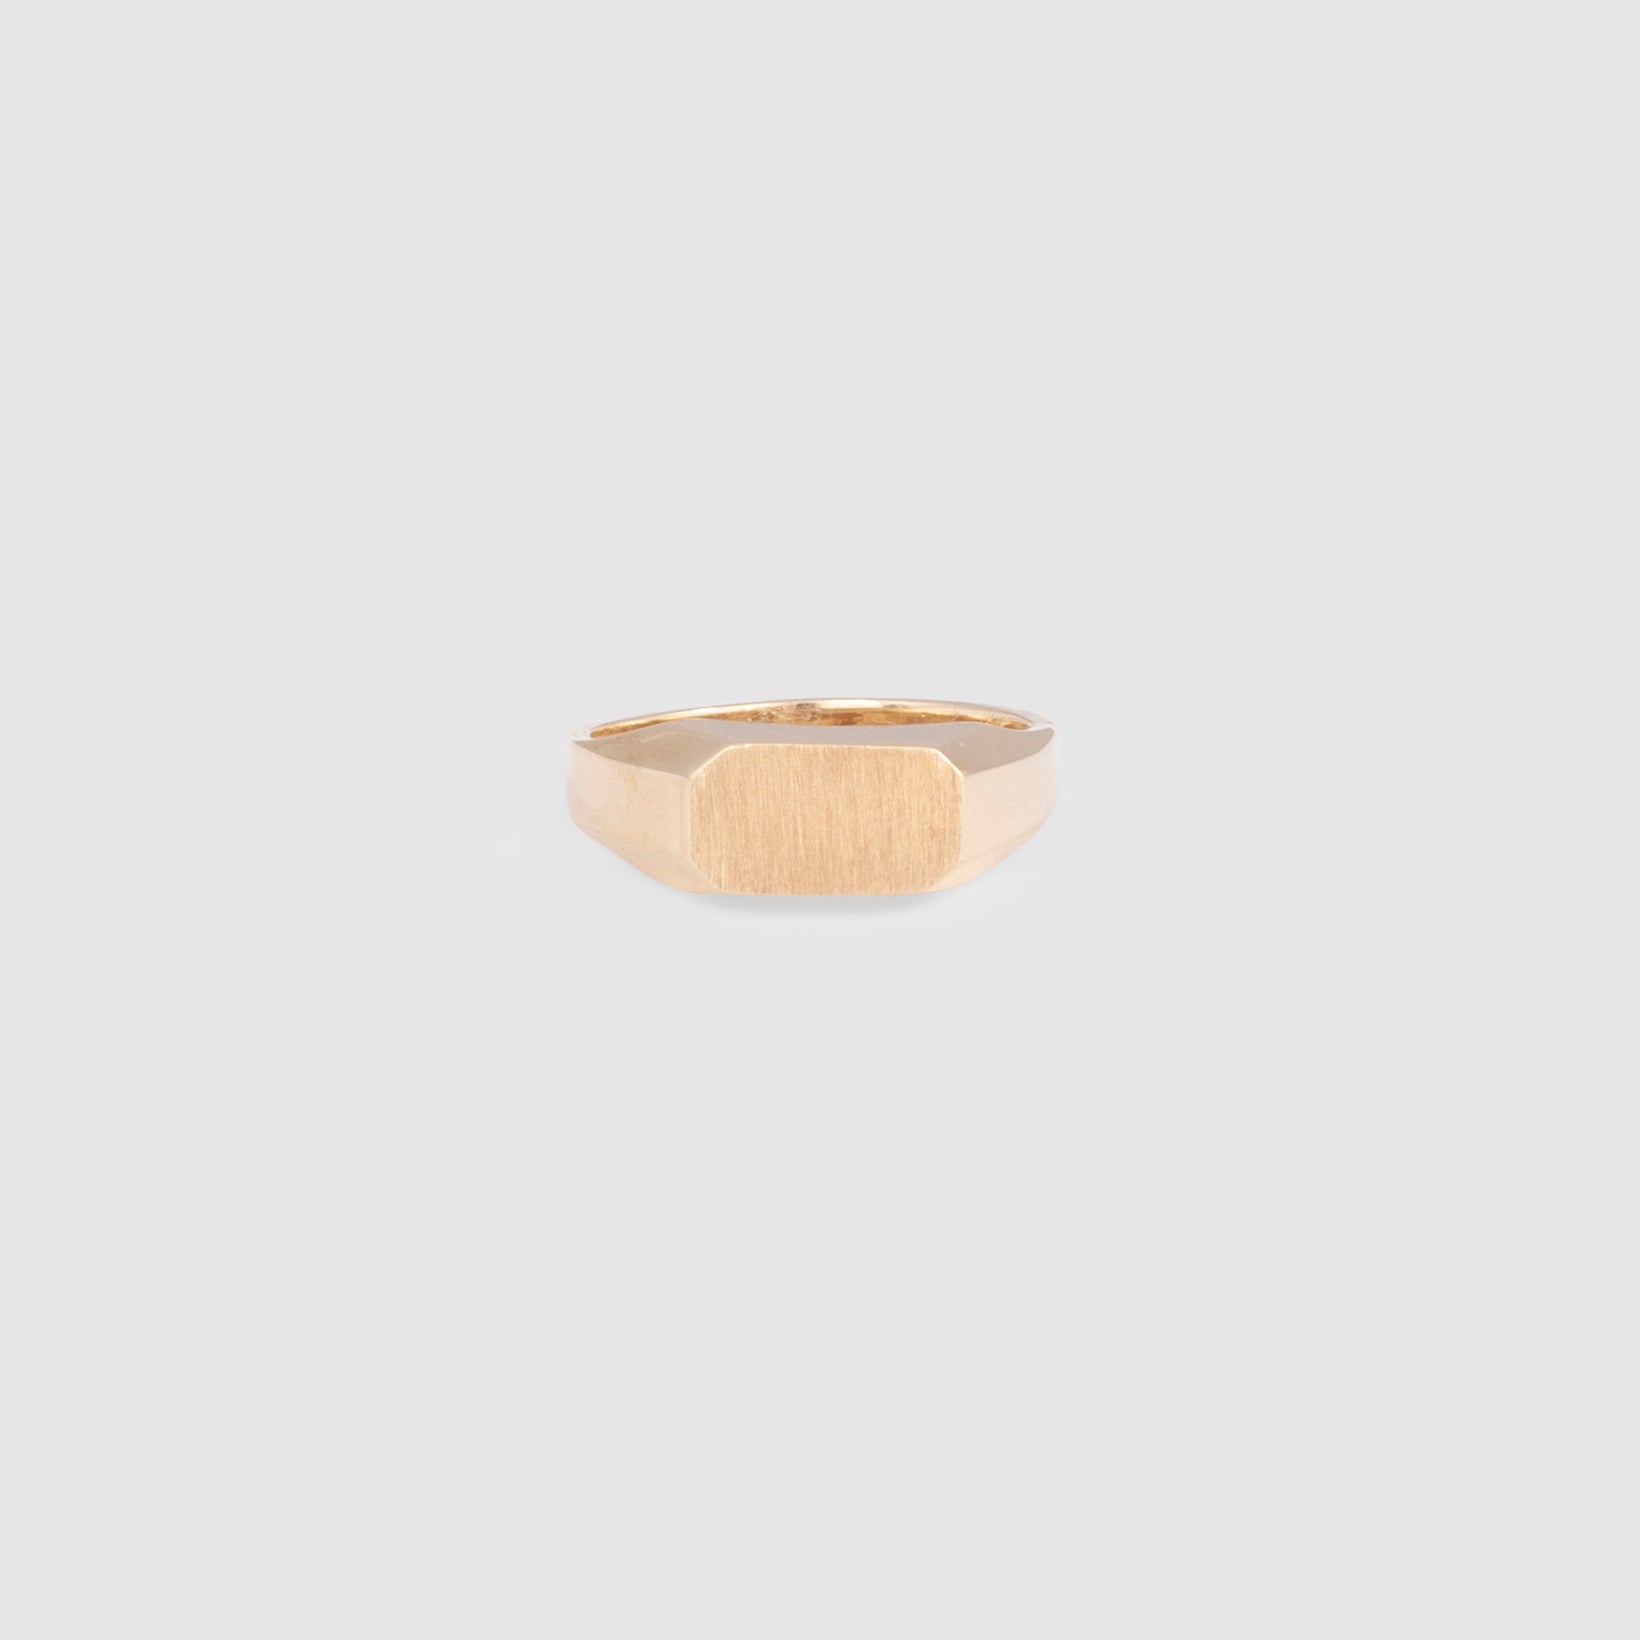 OCTAGON SIGNET PINKY RING